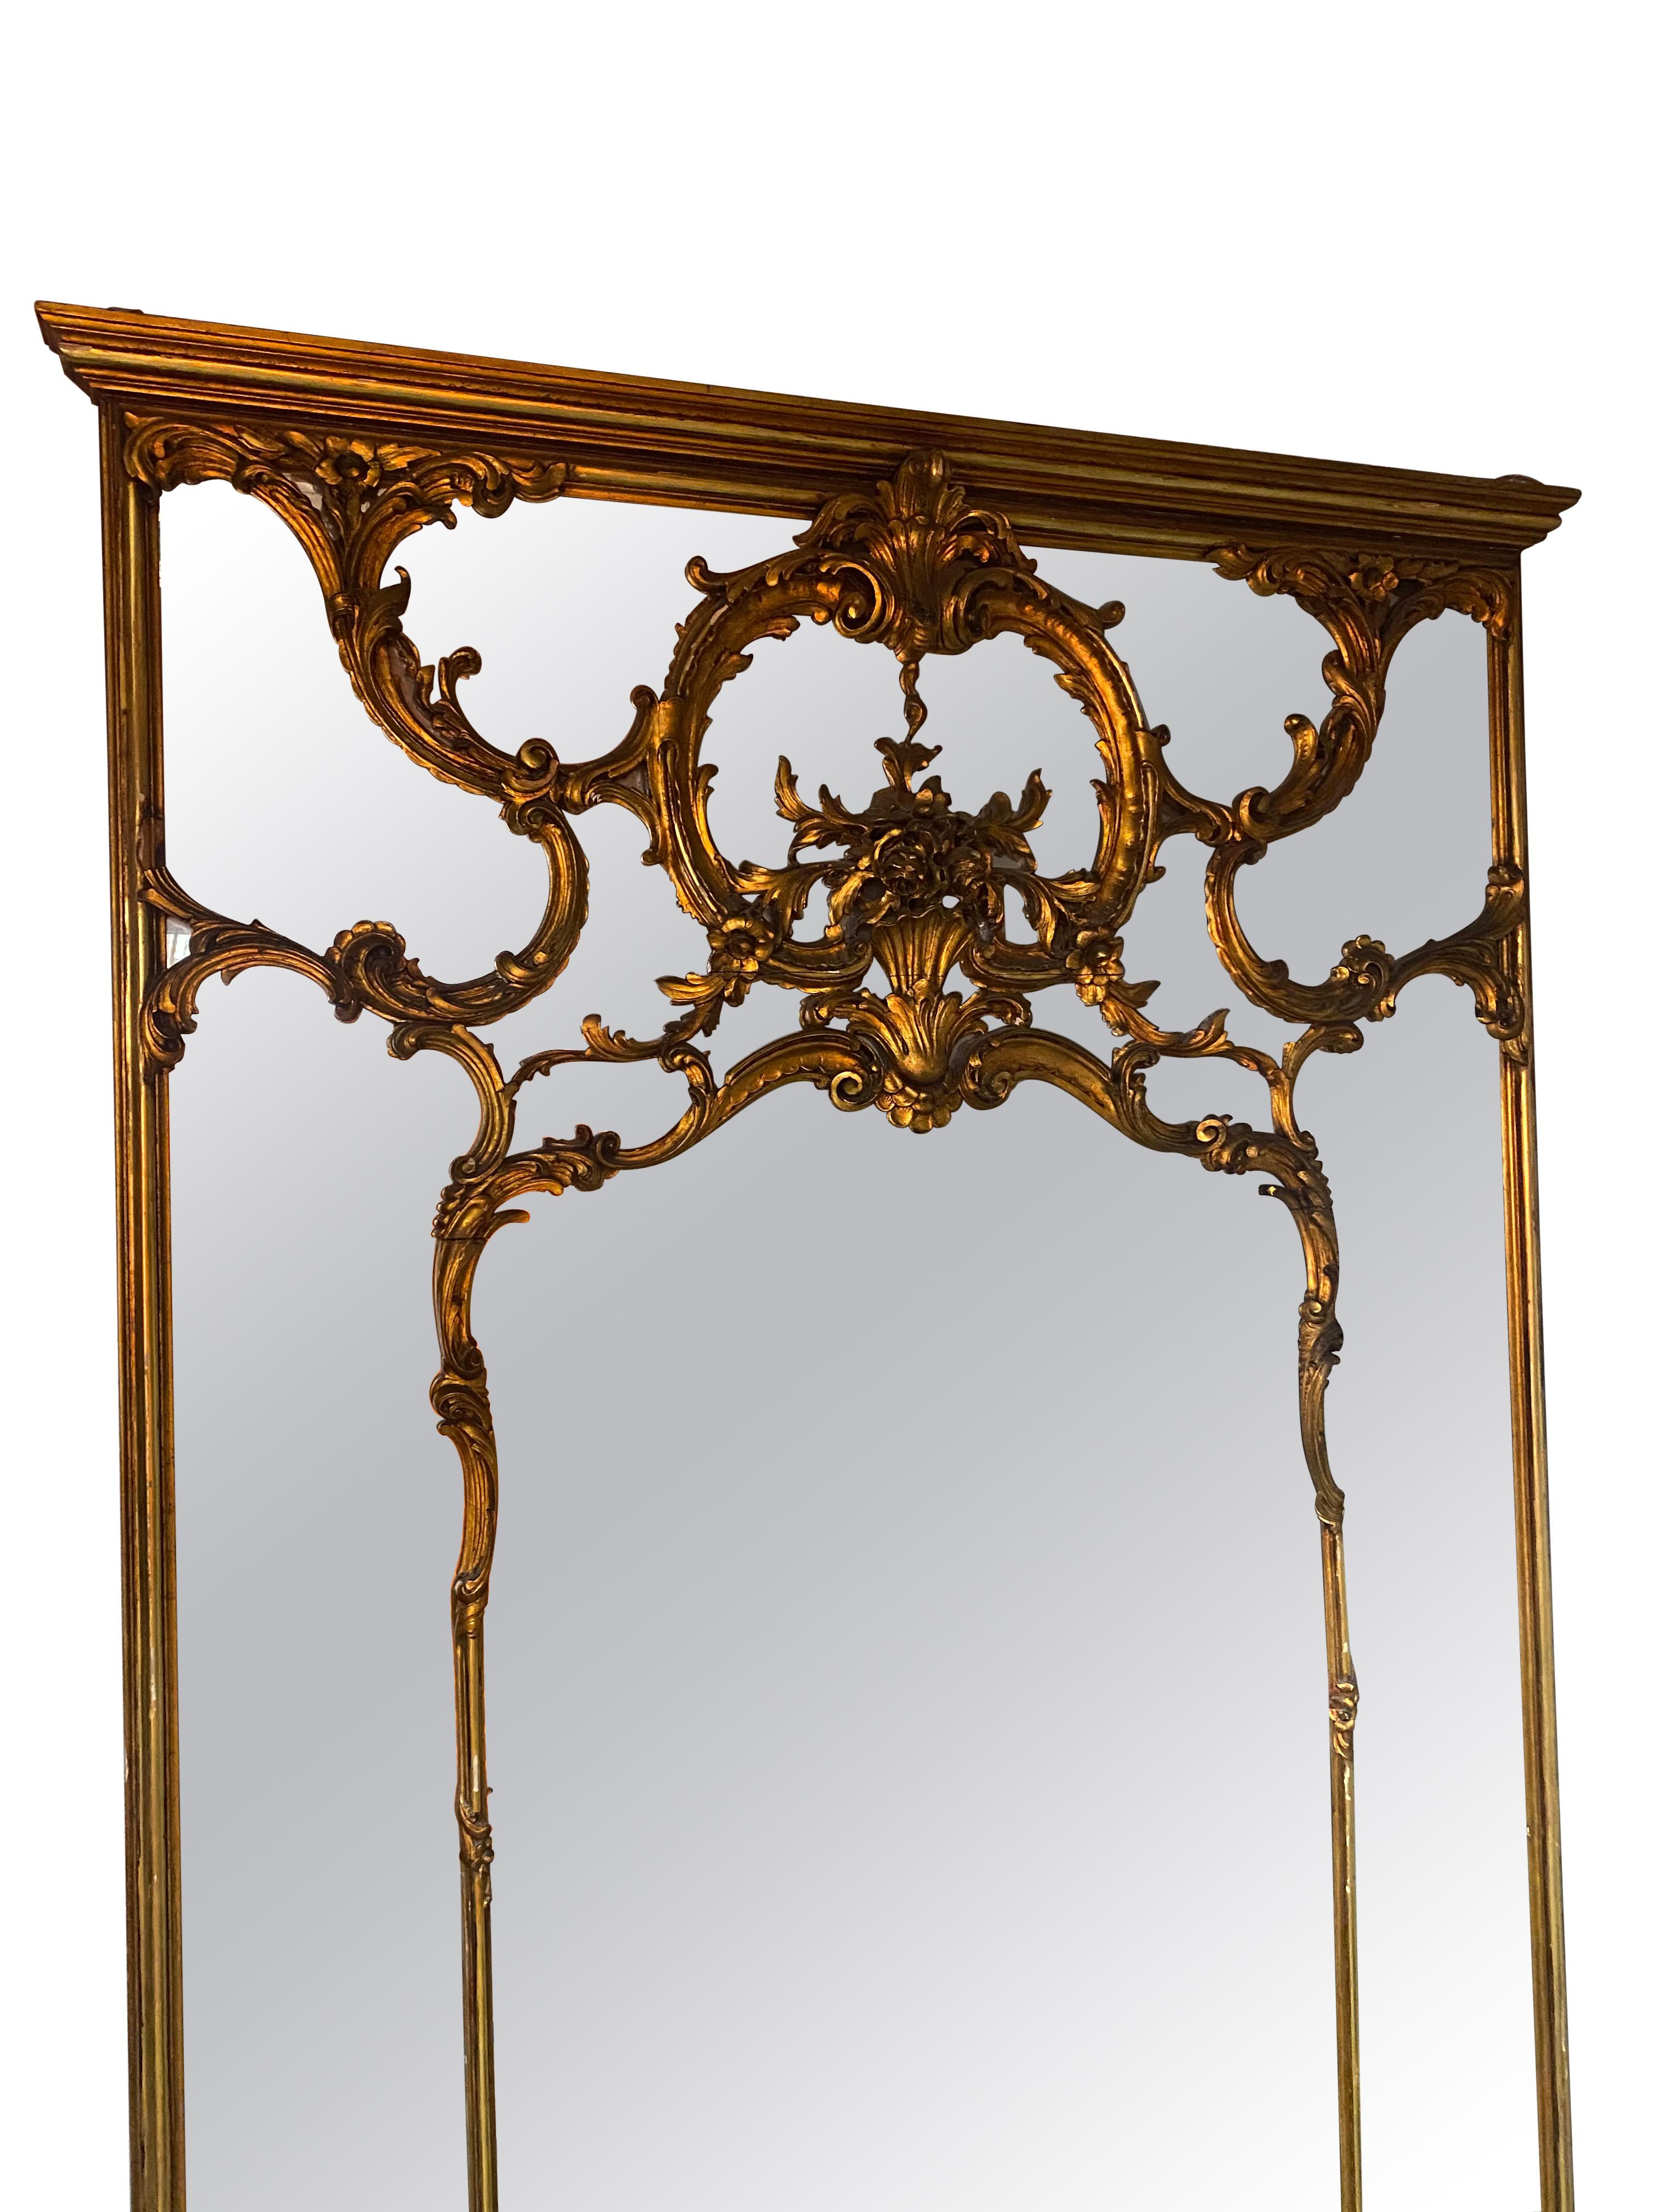 Antique full length gold decorative mirror in the style of Louis XVI. Slight age showing in some of the mirror adding to the character. 
A beautiful piece that would compliment any grand room or hallway. The slightly aged glass is decorated with